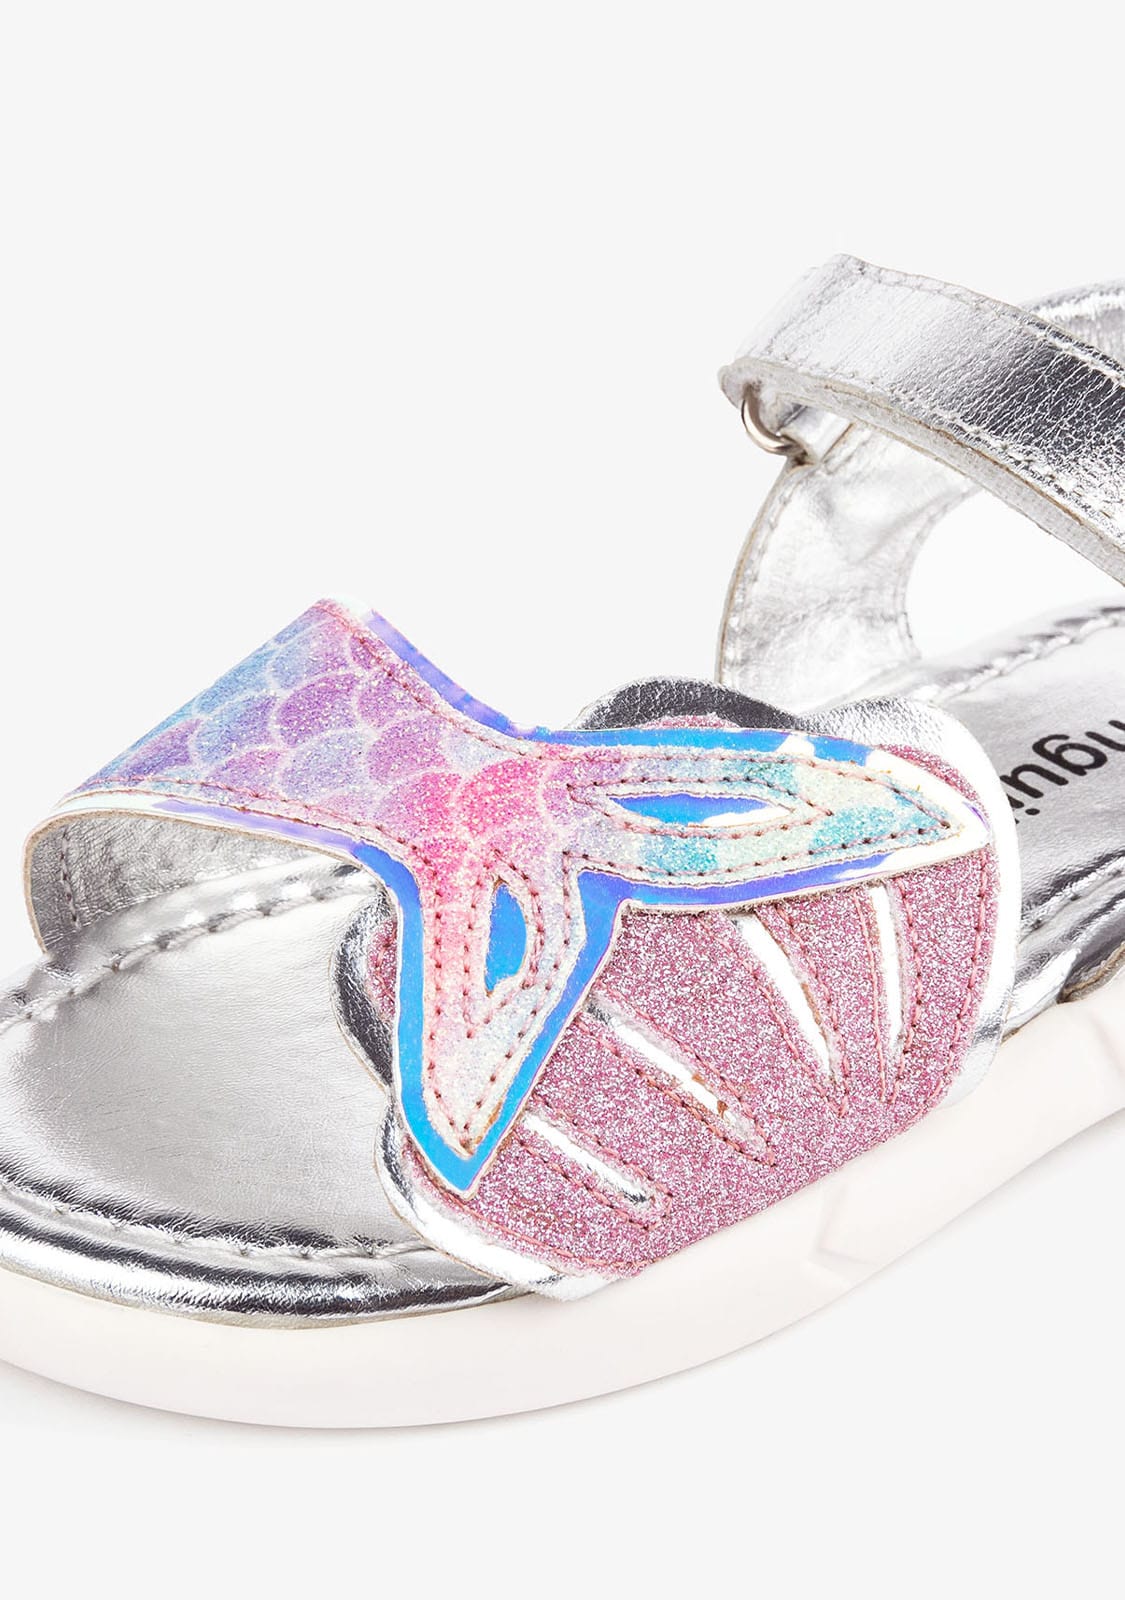 CONGUITOS Shoes Girl's Multicolor Mermaid Leather Sandals